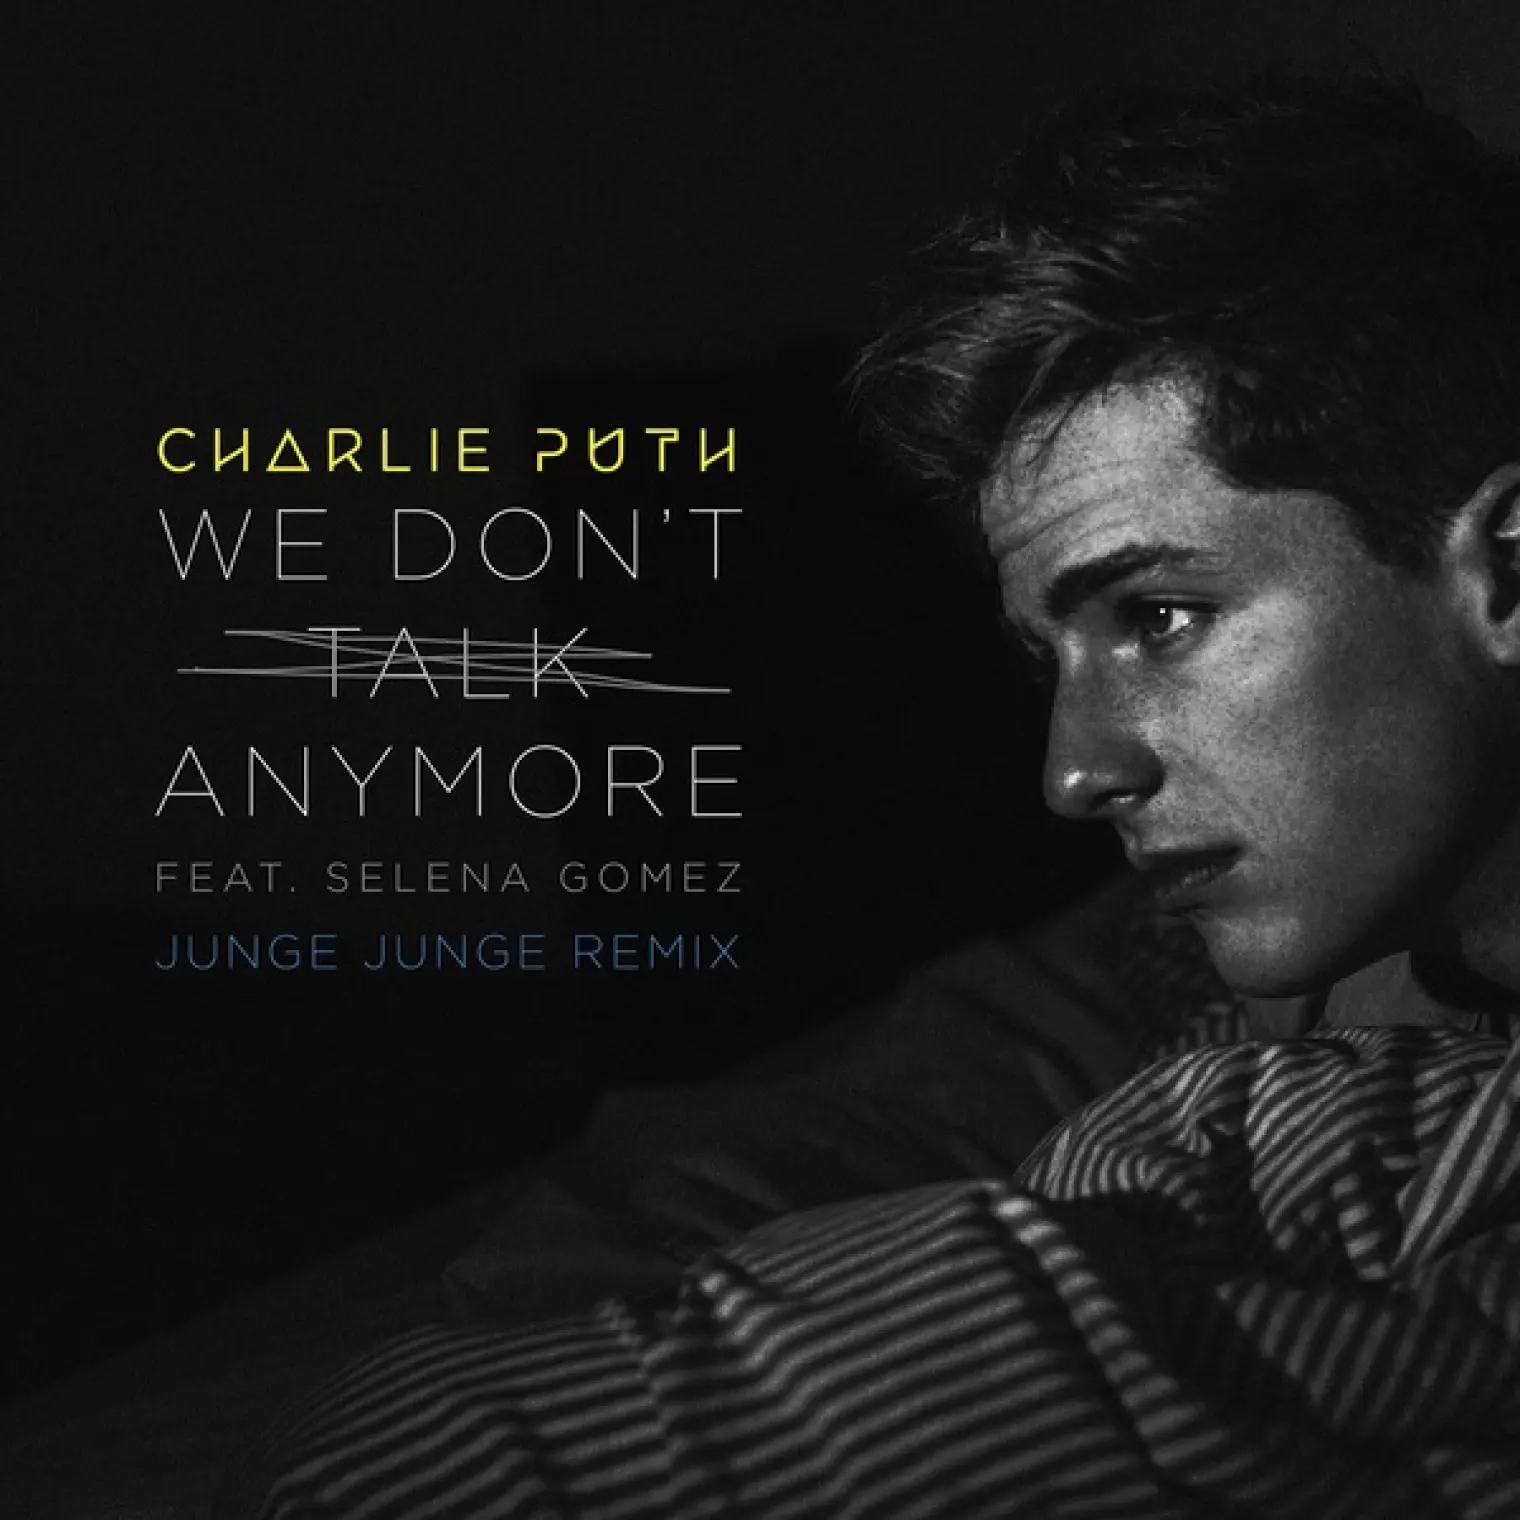 We Don't Talk Anymore (feat. Selena Gomez) (Junge Junge Remix) -  Charlie Puth 